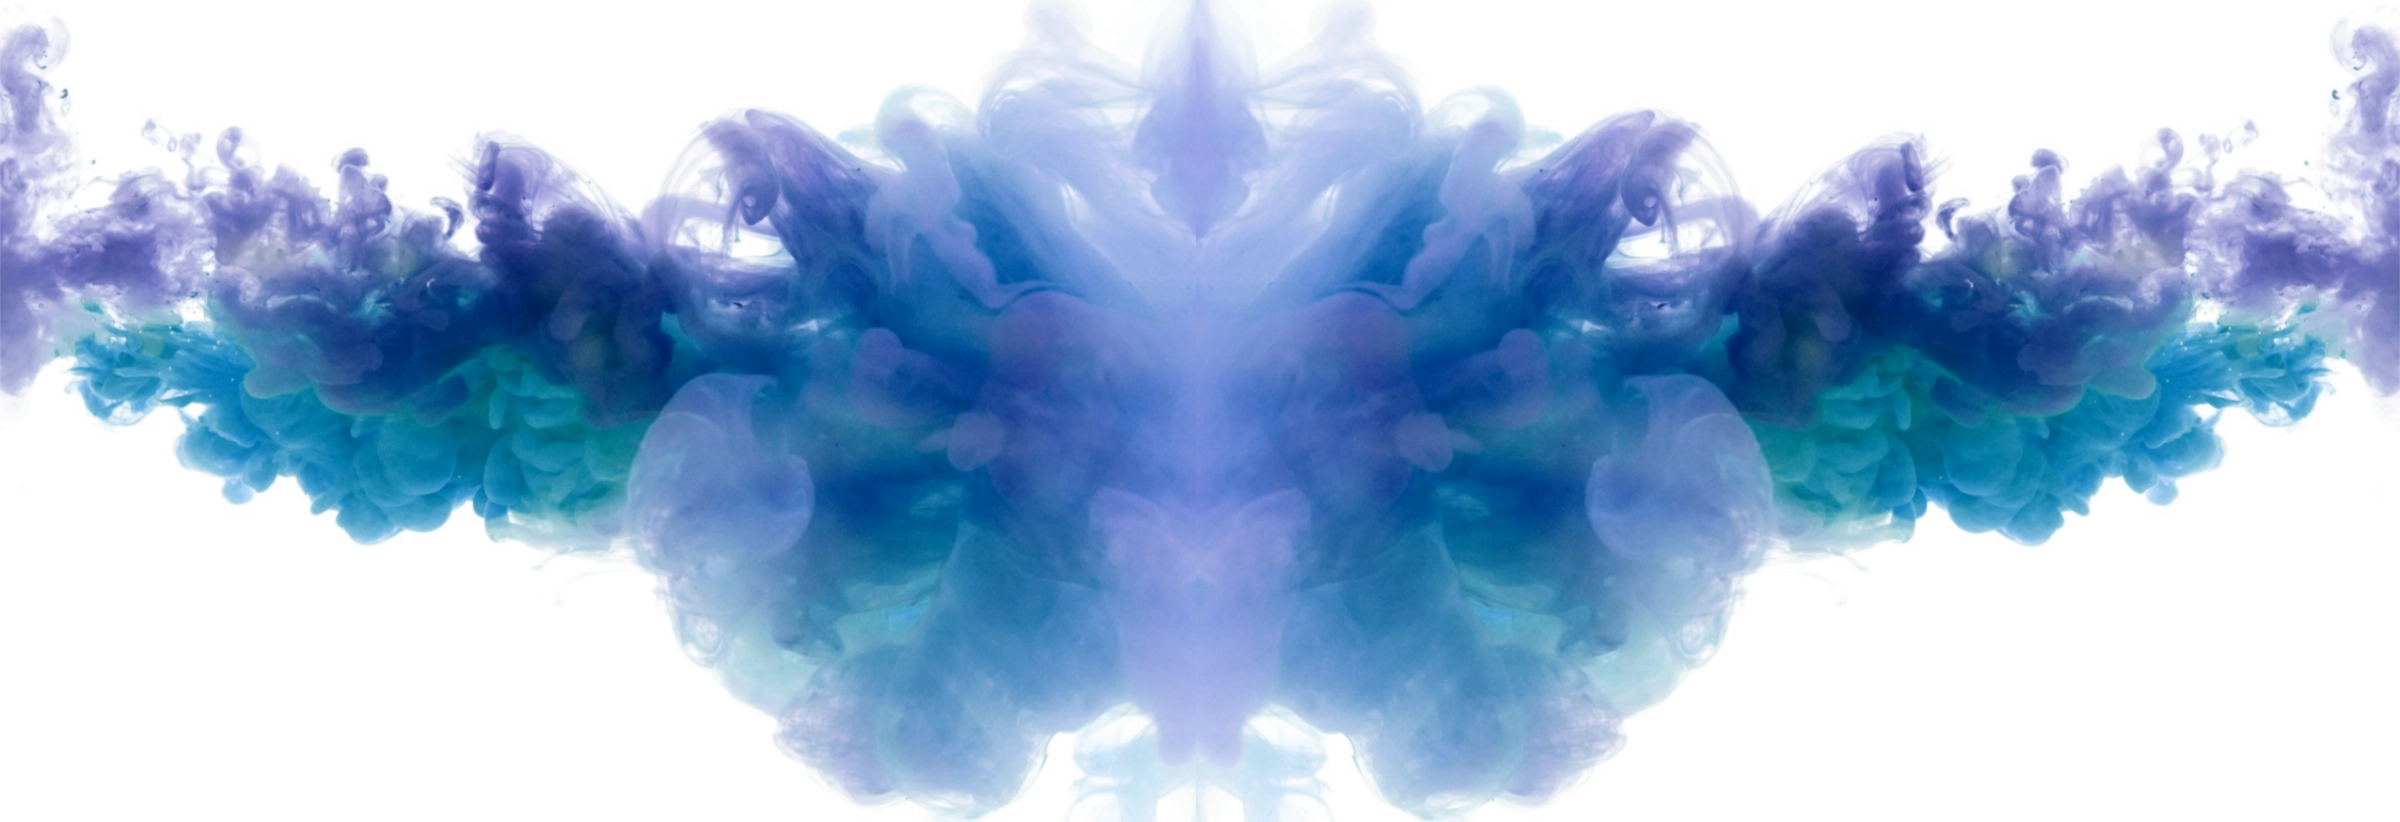 r307-blue-smoke-together-2-1566261712743.png